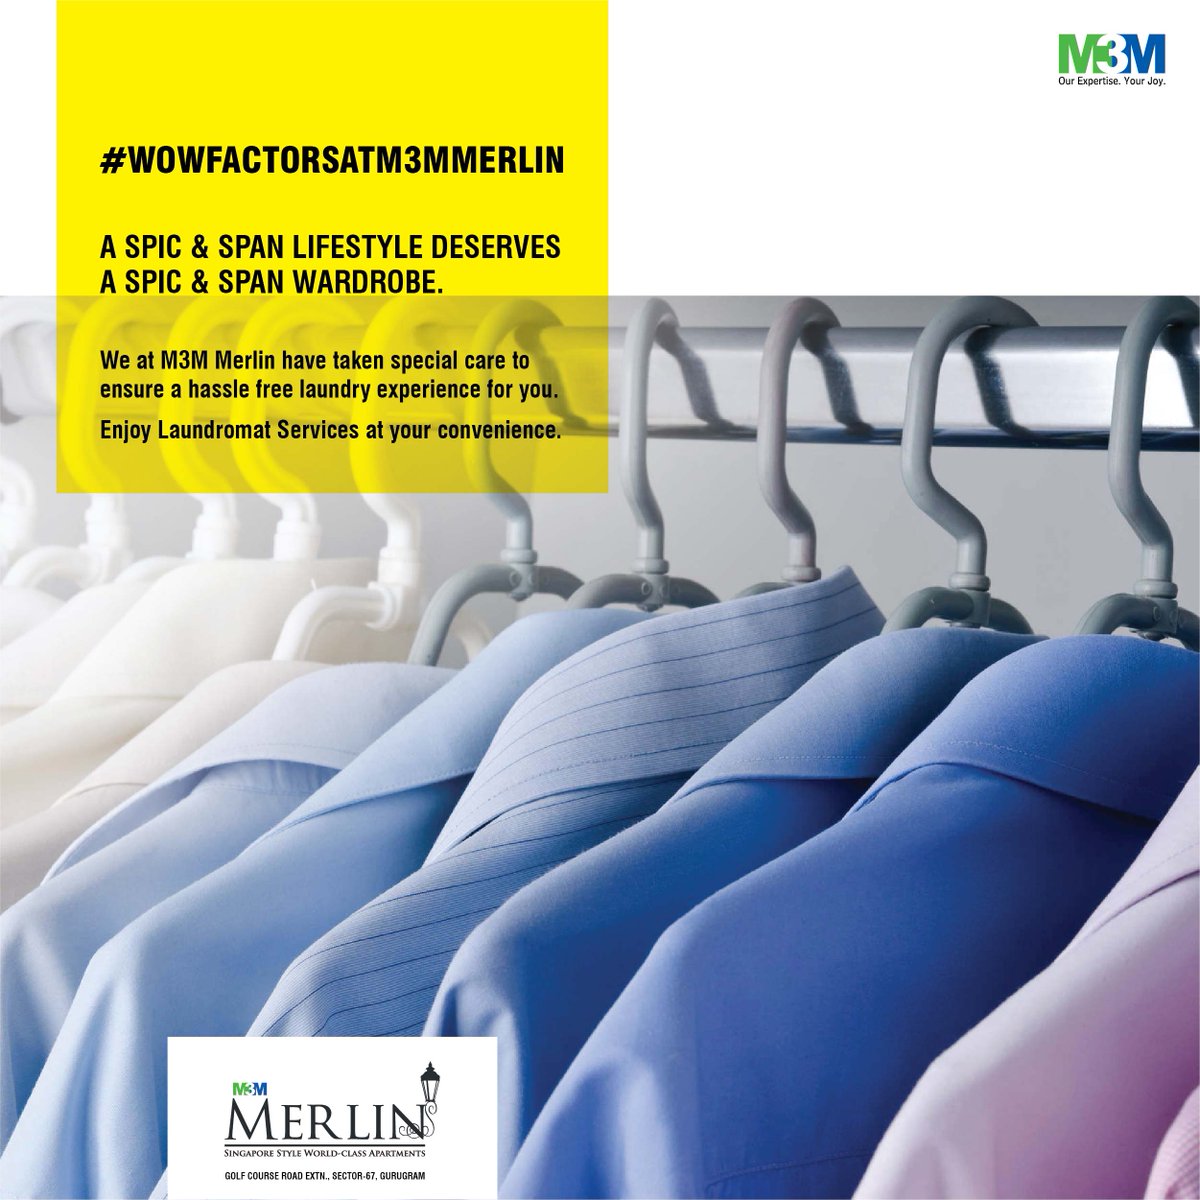 M3M Merlin opens Laundromat Services at Your Convenience Update